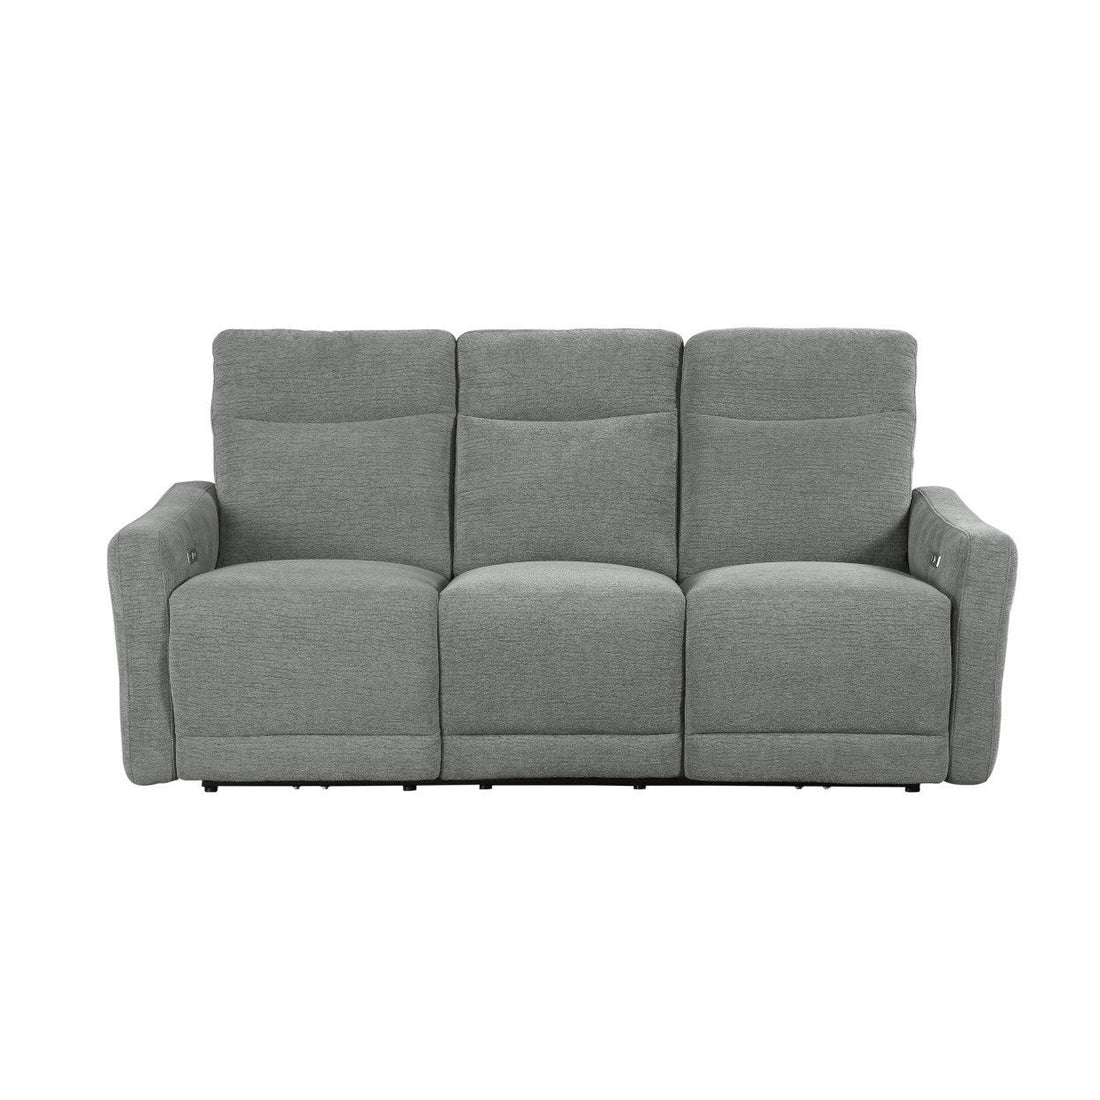 POWER D. LAY FLAT RECLINING SOFA W/ POWER HEADRESTS, DOVE 100% POLYESTER 9804DV-3PWH